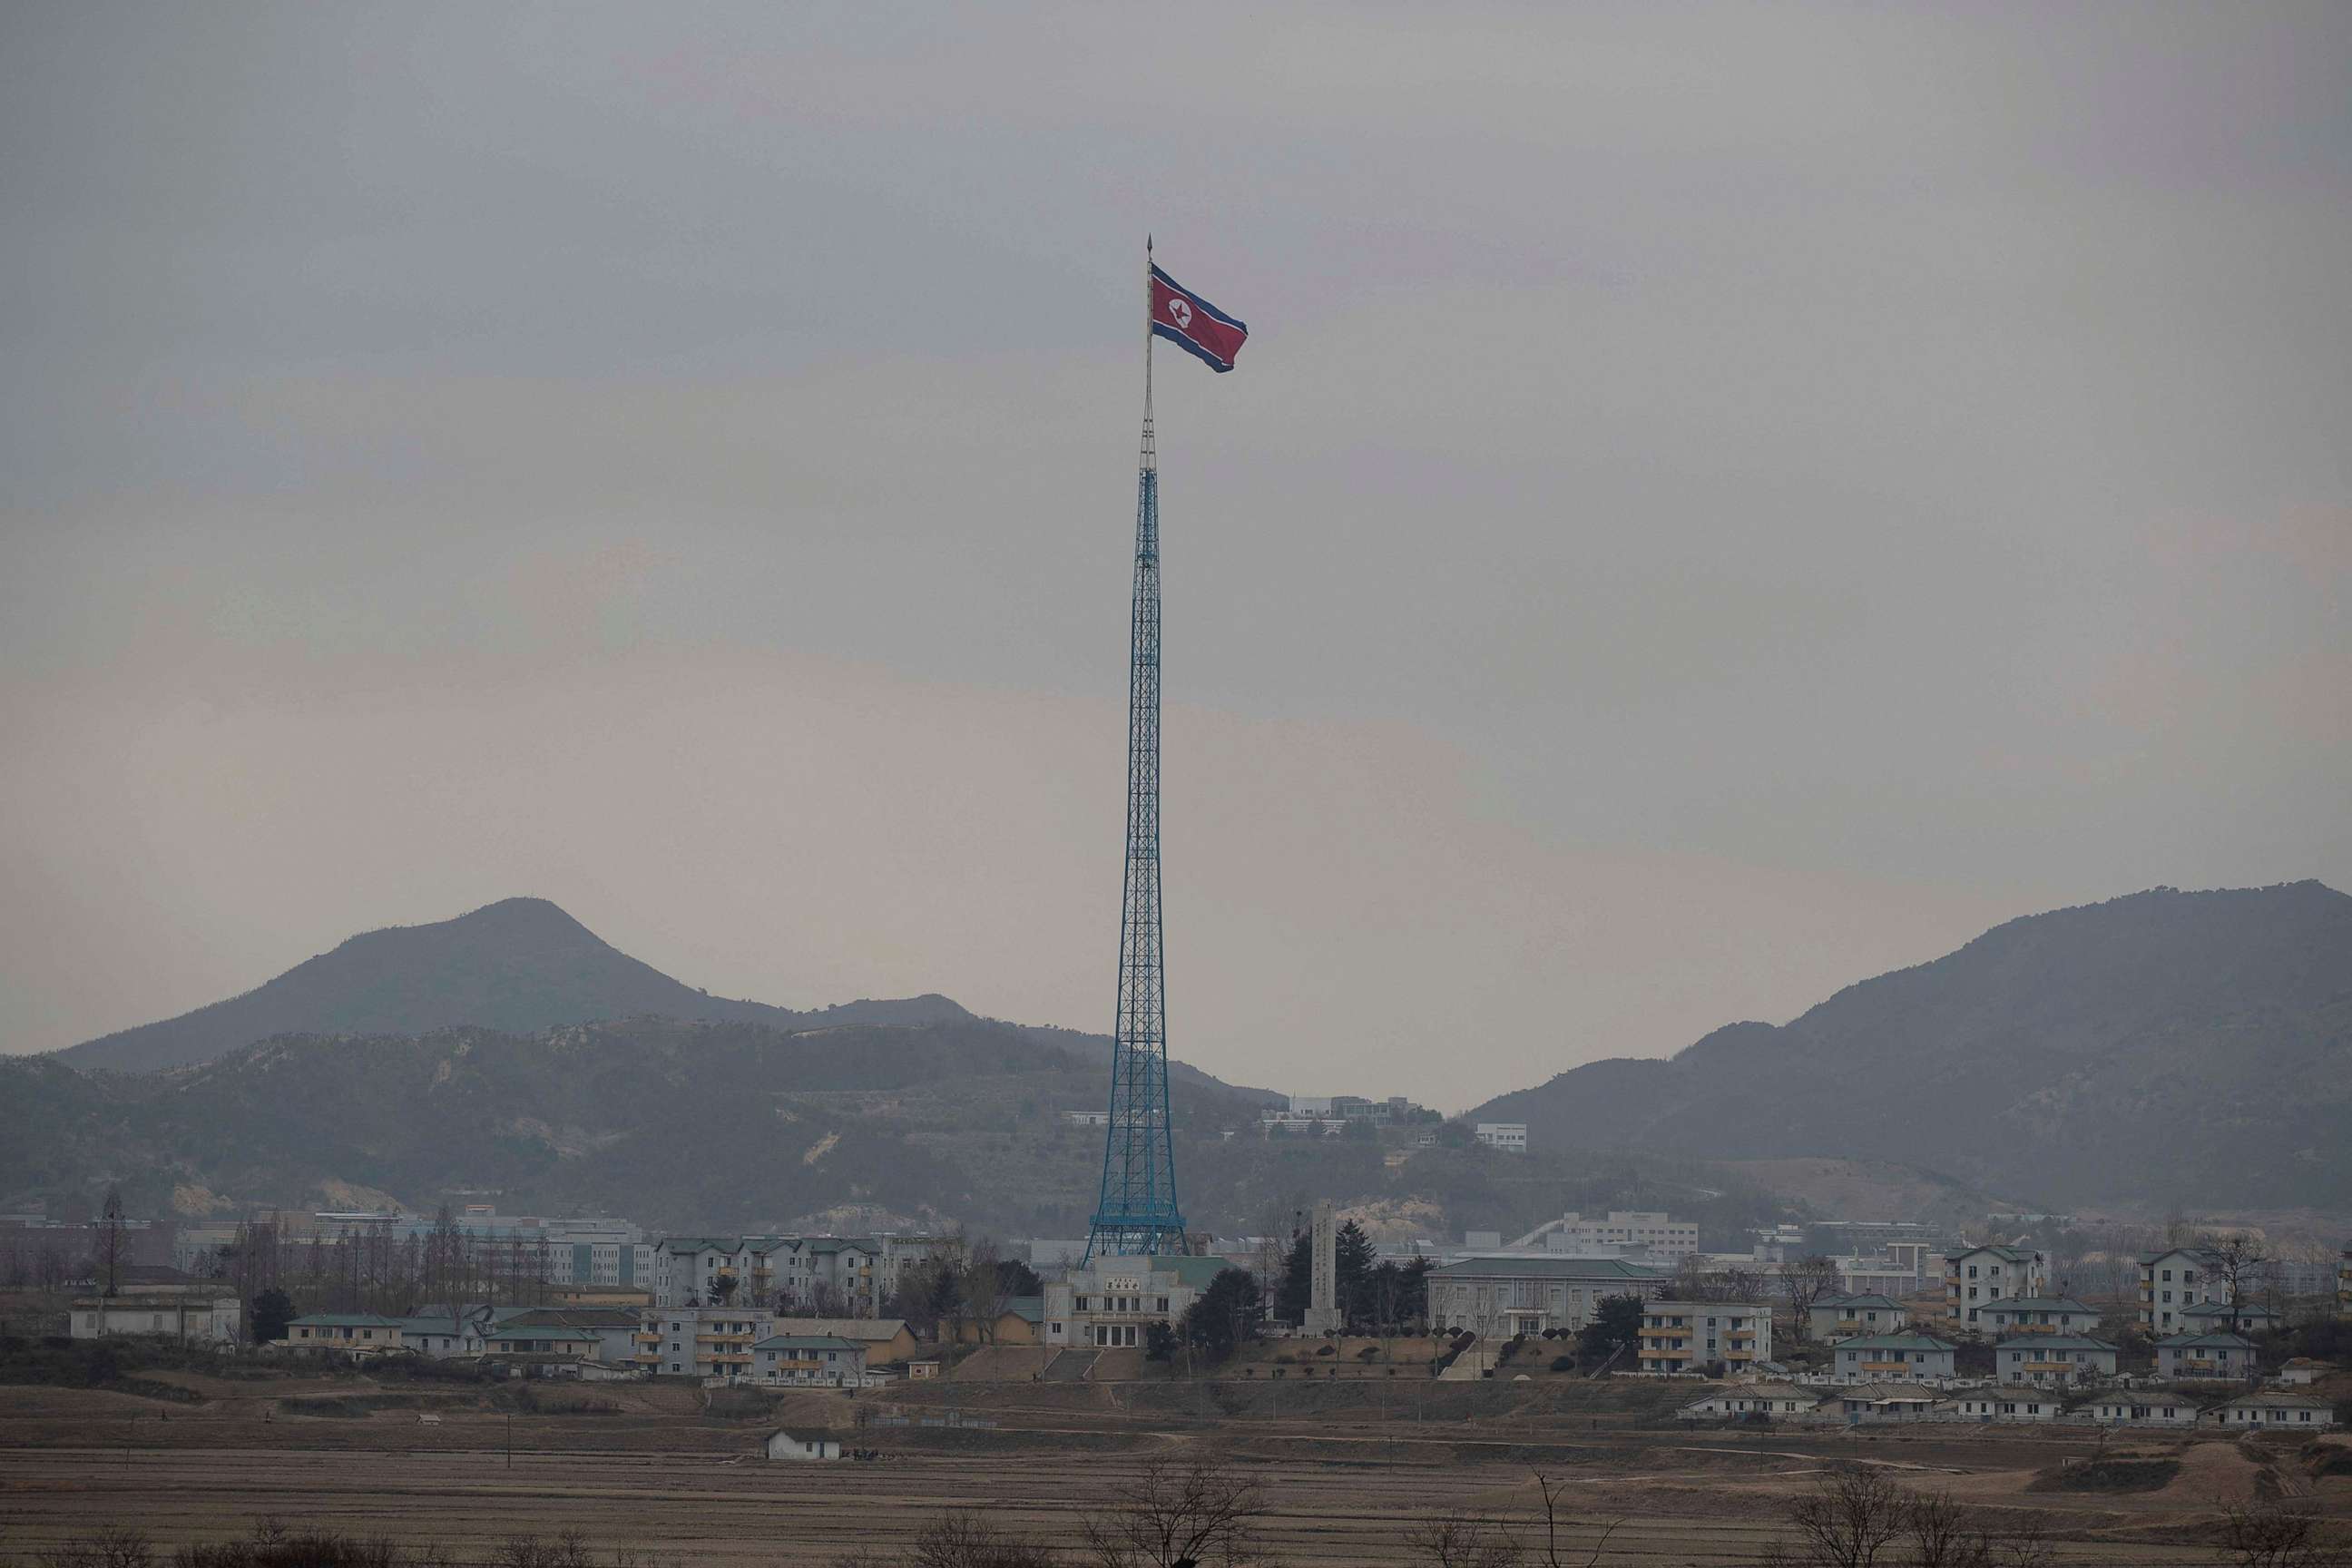 PHOTO: North Korean propaganda village "Gijungdong" is seen from an South Korea's observation post inside the JSA during a media tour at the Joint Security Area (JSA) on the Demilitarized Zone (DMZ) in Paju, South Korea, March 3, 2023.